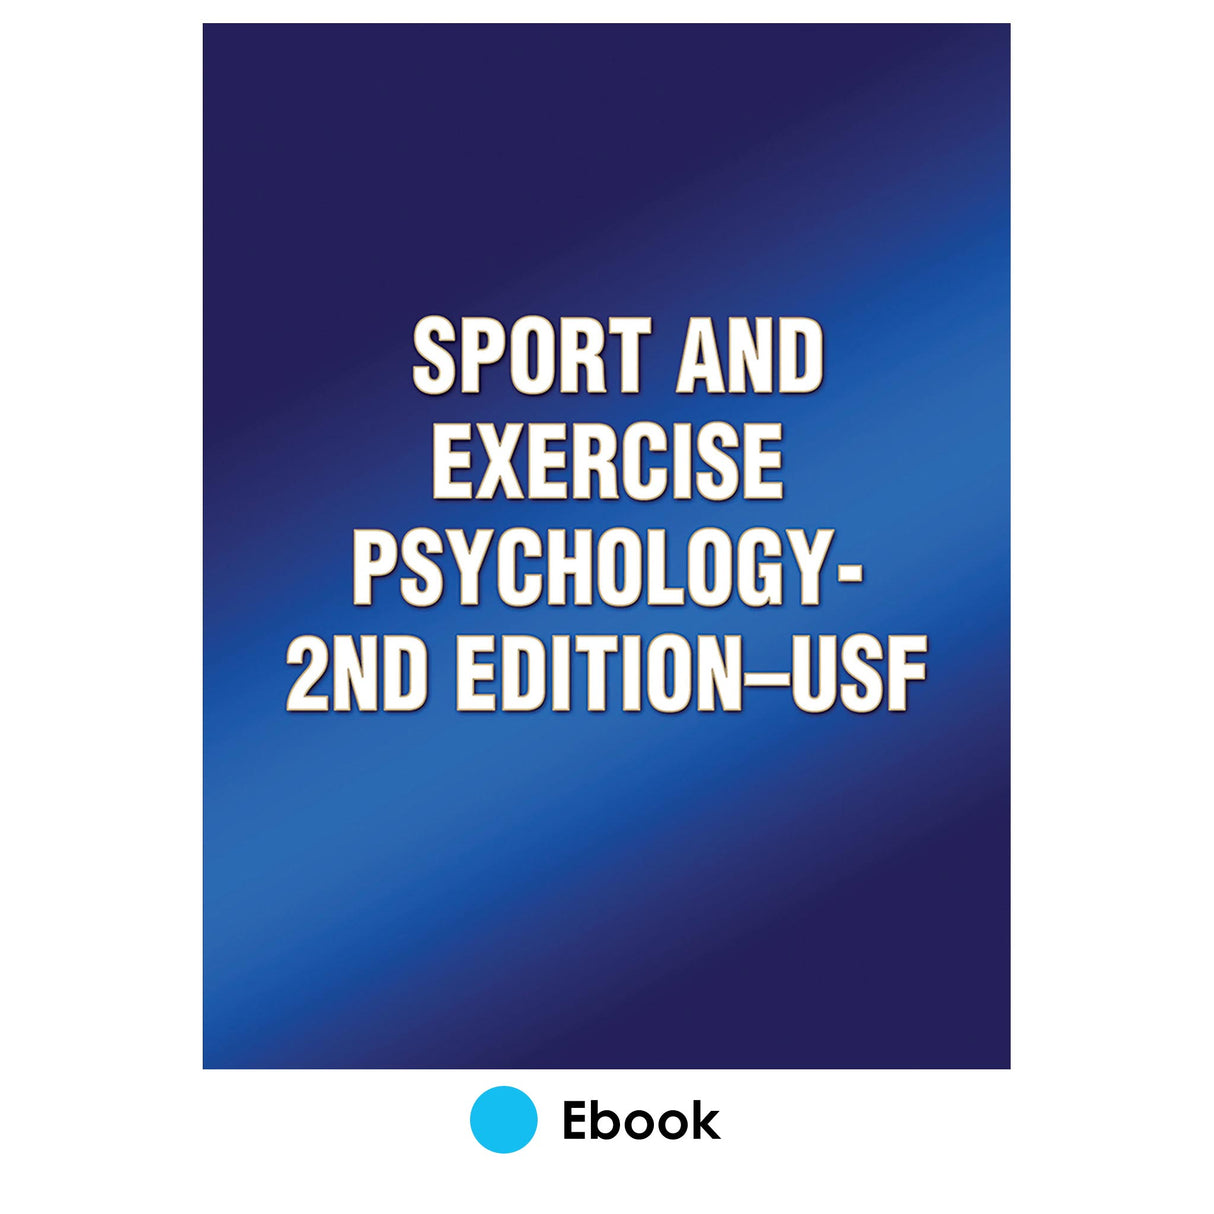 Sport and Exercise Psychology-2nd Edition-USF